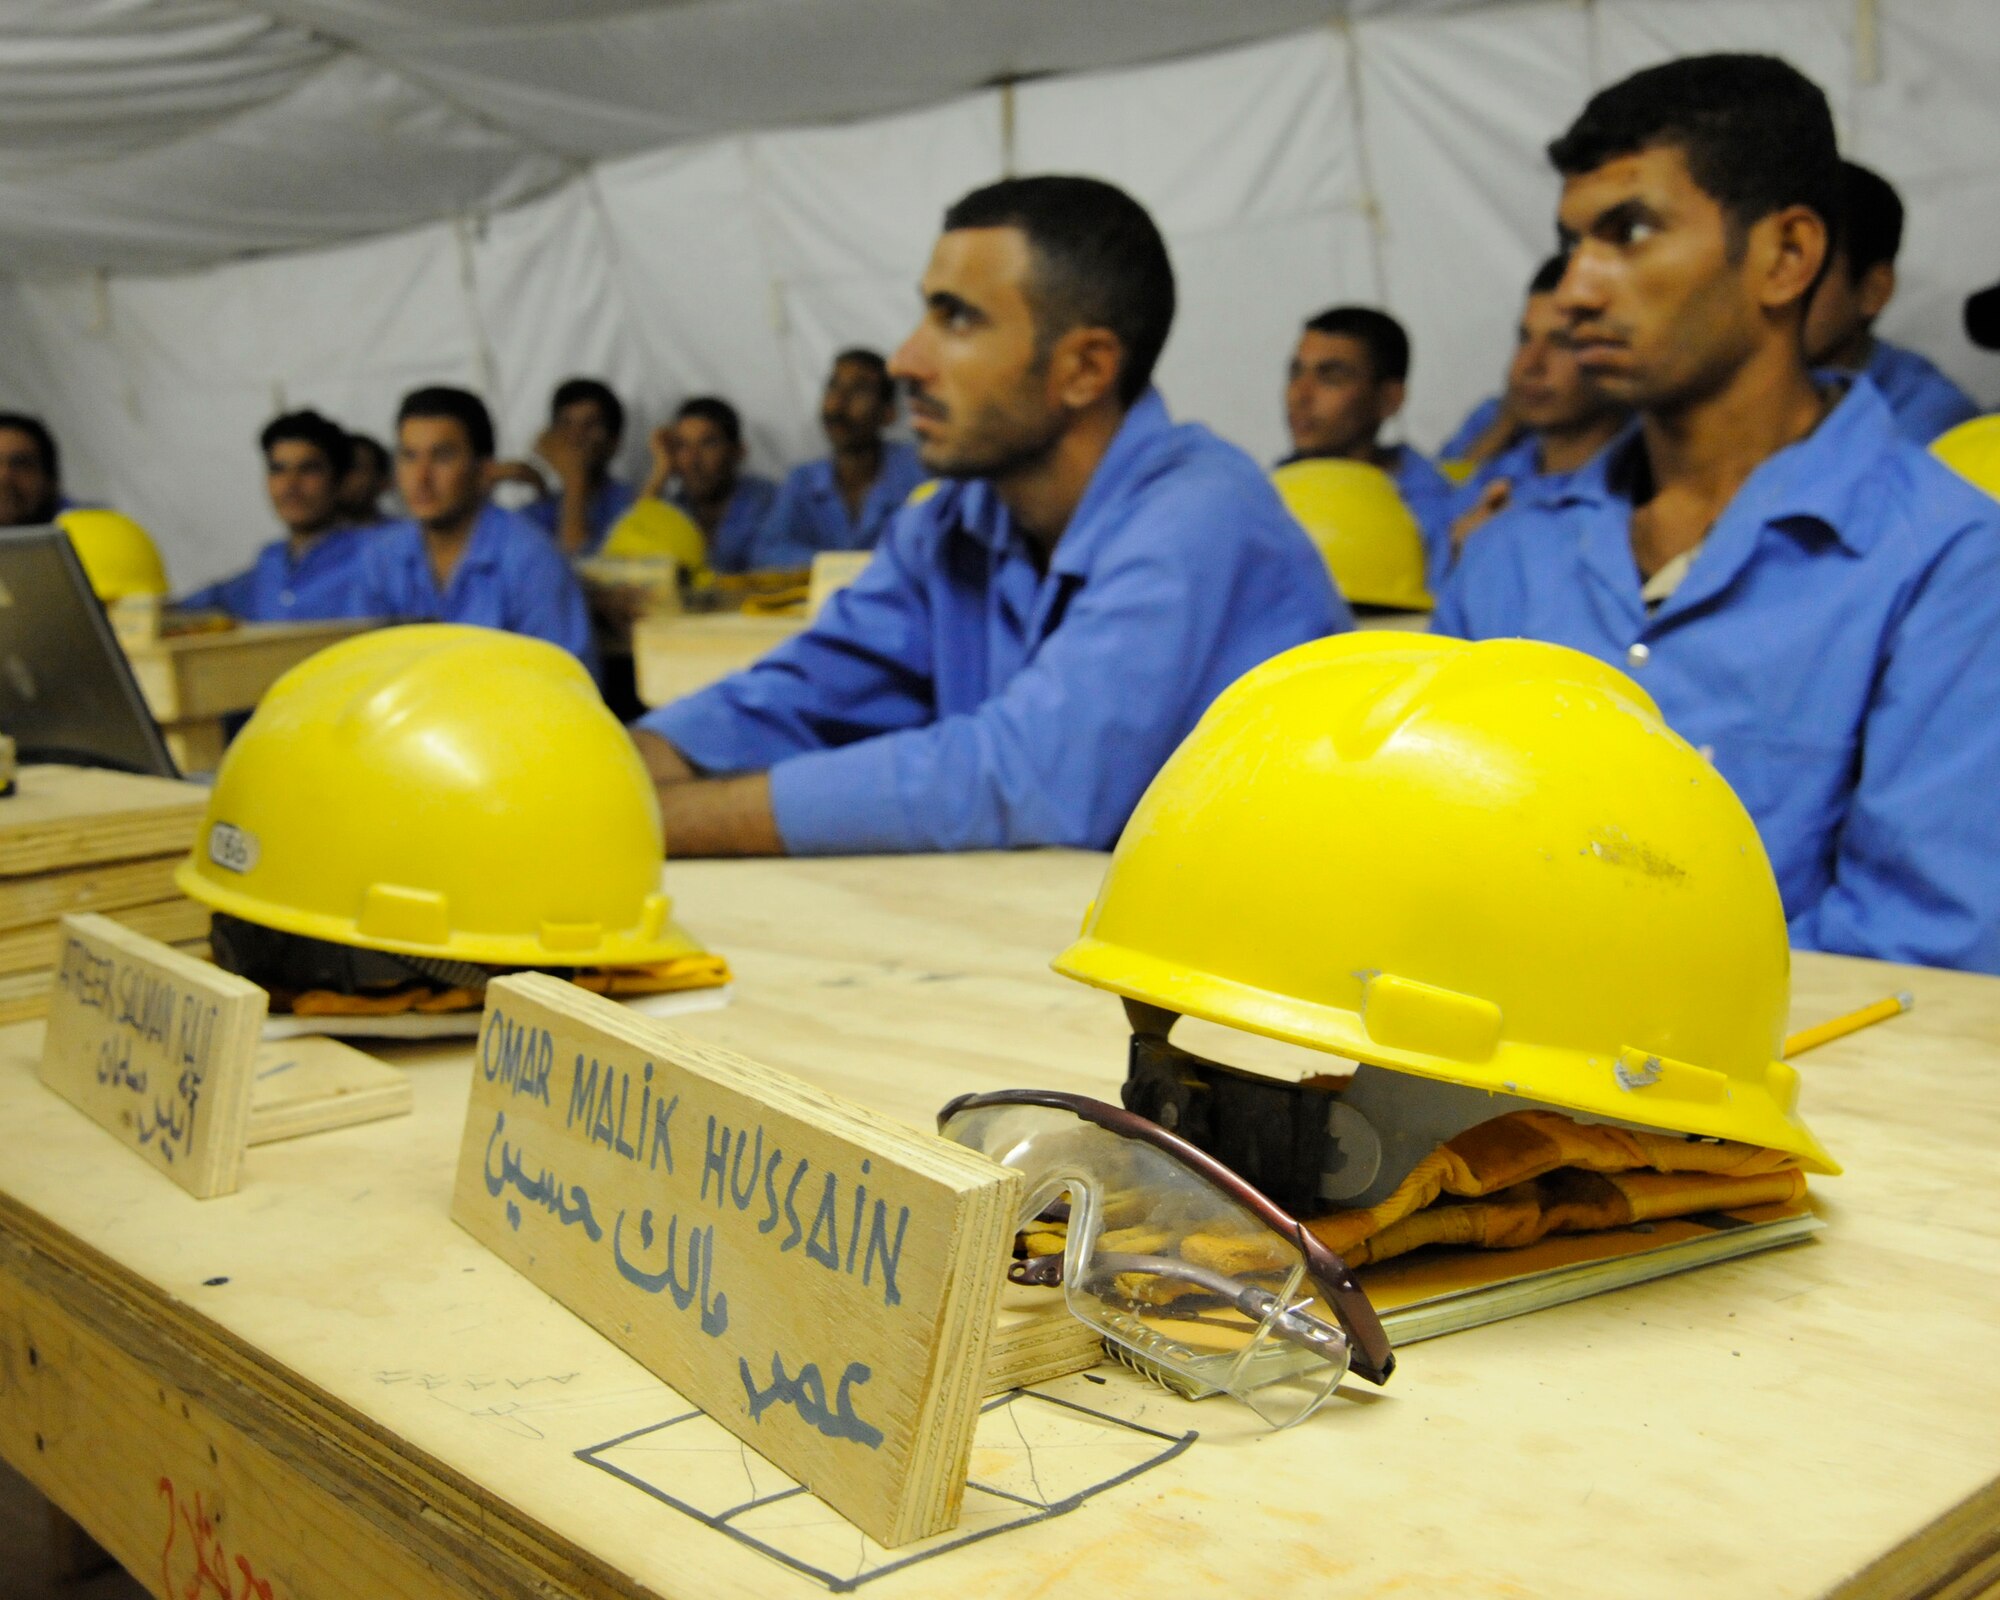 HAWR RAJAB, IRAQ -- Iraqi student workers listen to a lecture during the builders course of the Village of Hope program at Hawr Rajab, Iraq on Aug. 26. At the start of the course all students receive steel-toe boots, work gloves, coveralls, eye protection and a hard hat. (U.S. Air Force photo/Staff Sgt. Paul Villanueva II)